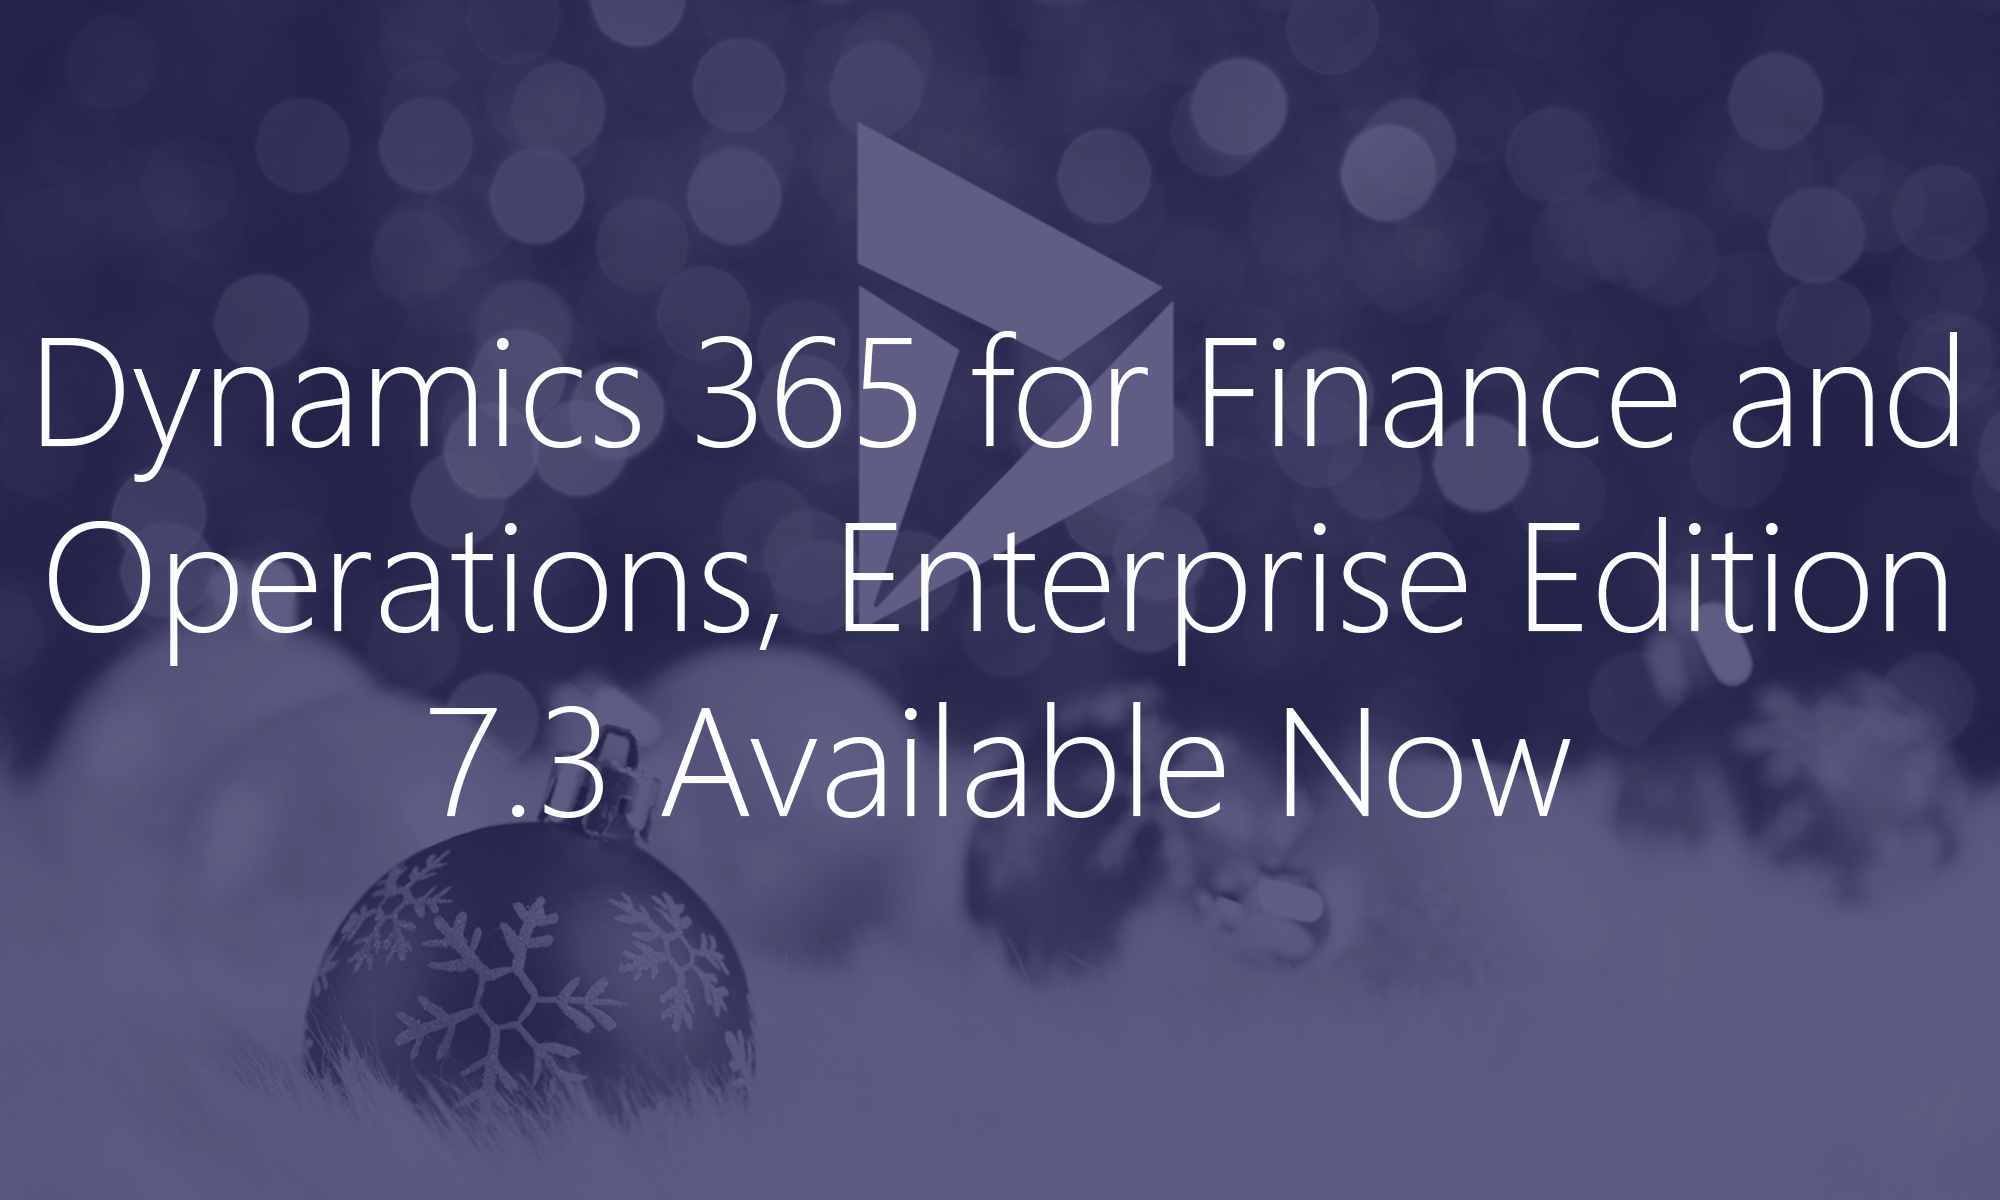 Dynamics 365 for Finance and Operations 7.3